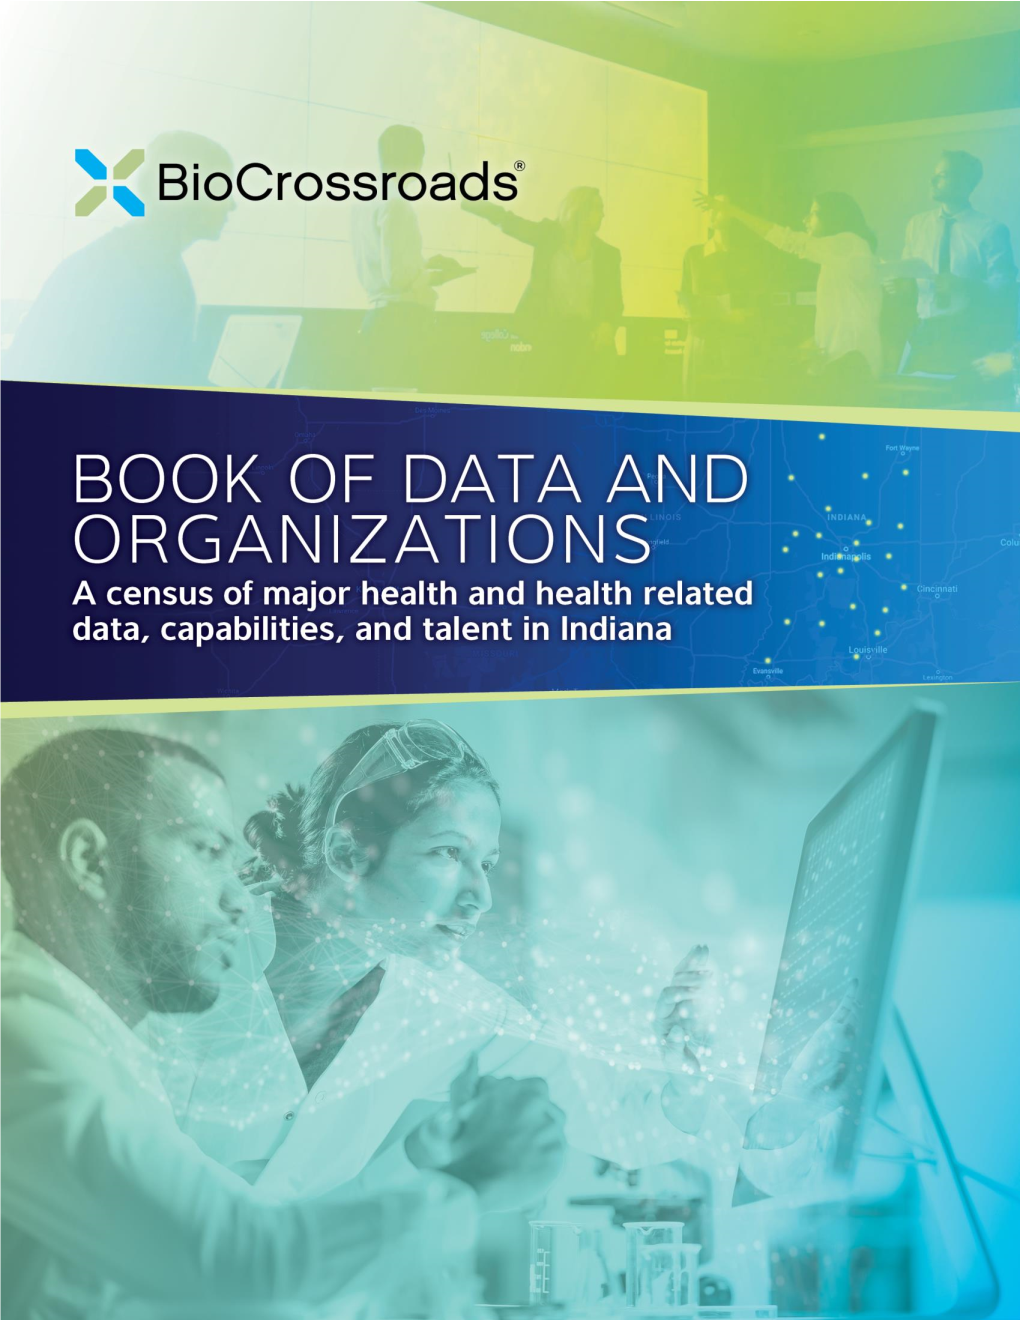 Book of Data and Organizations Version 4